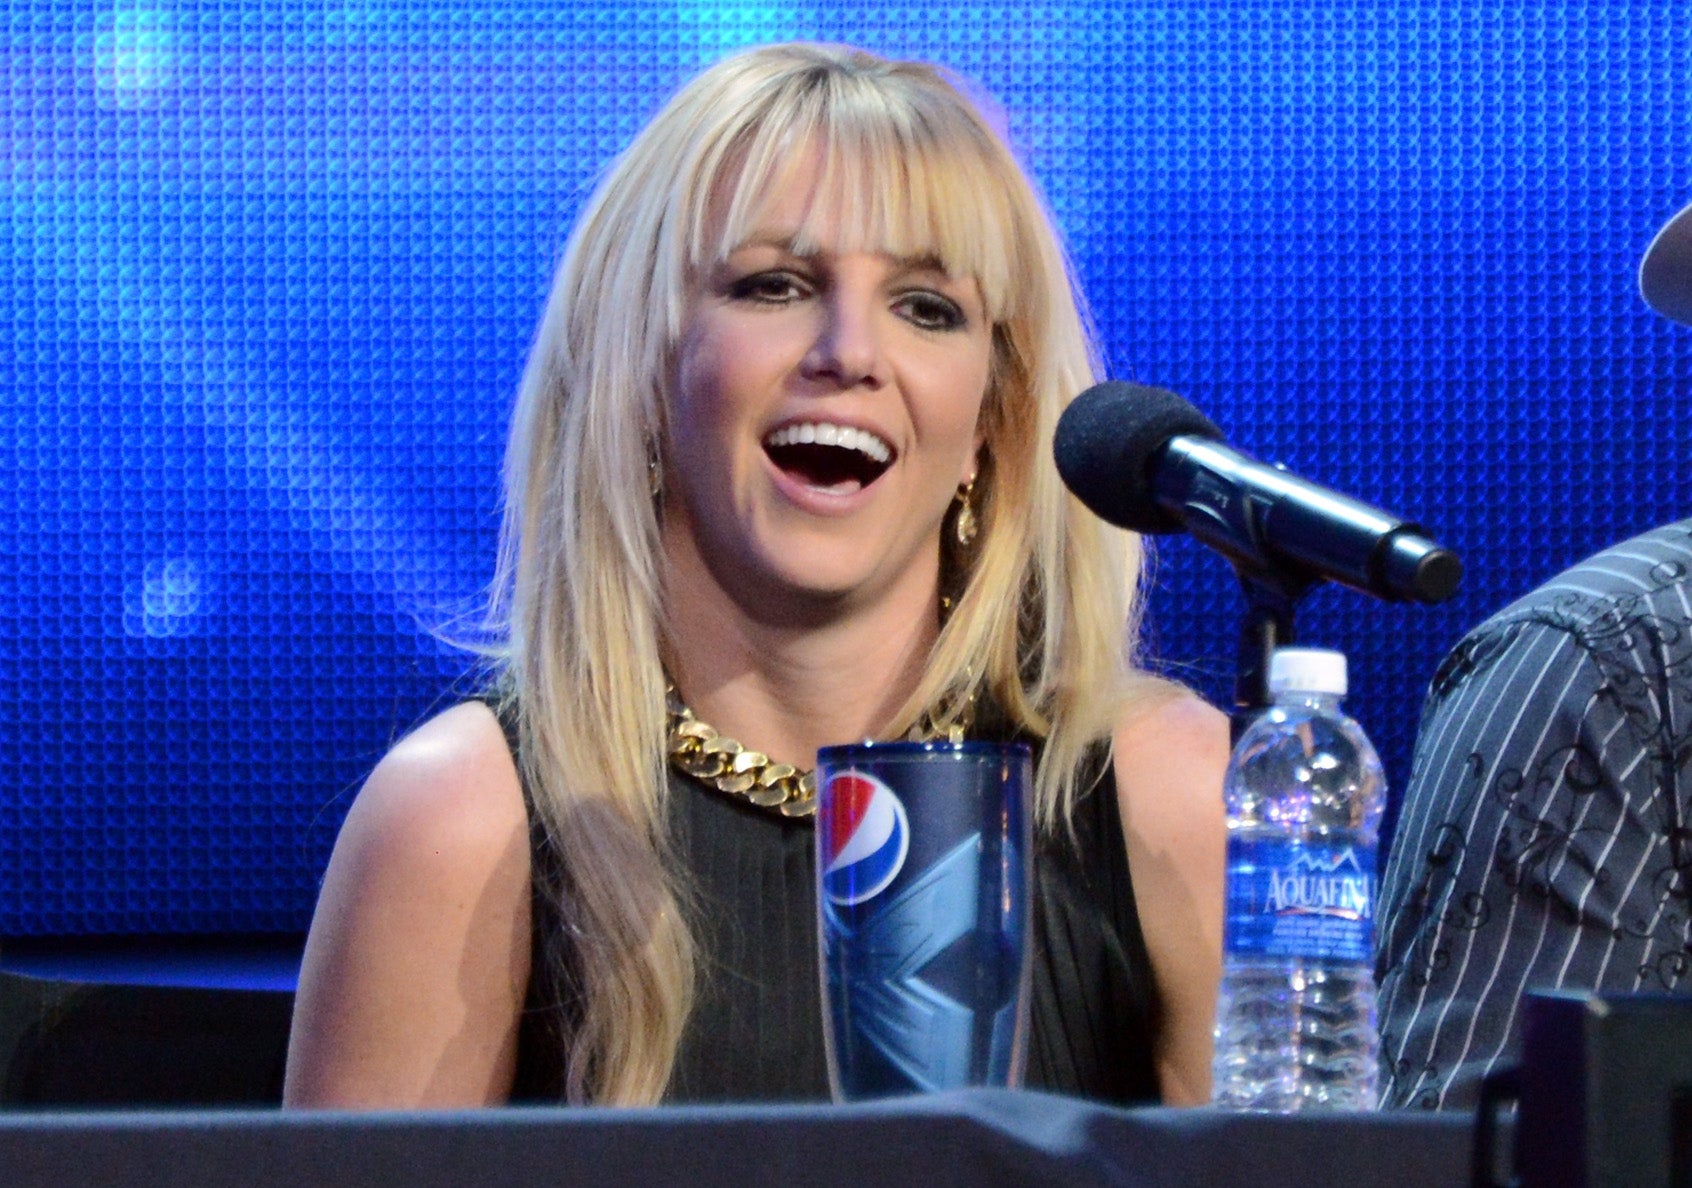 Spears during promotion for The X Factor in 2012